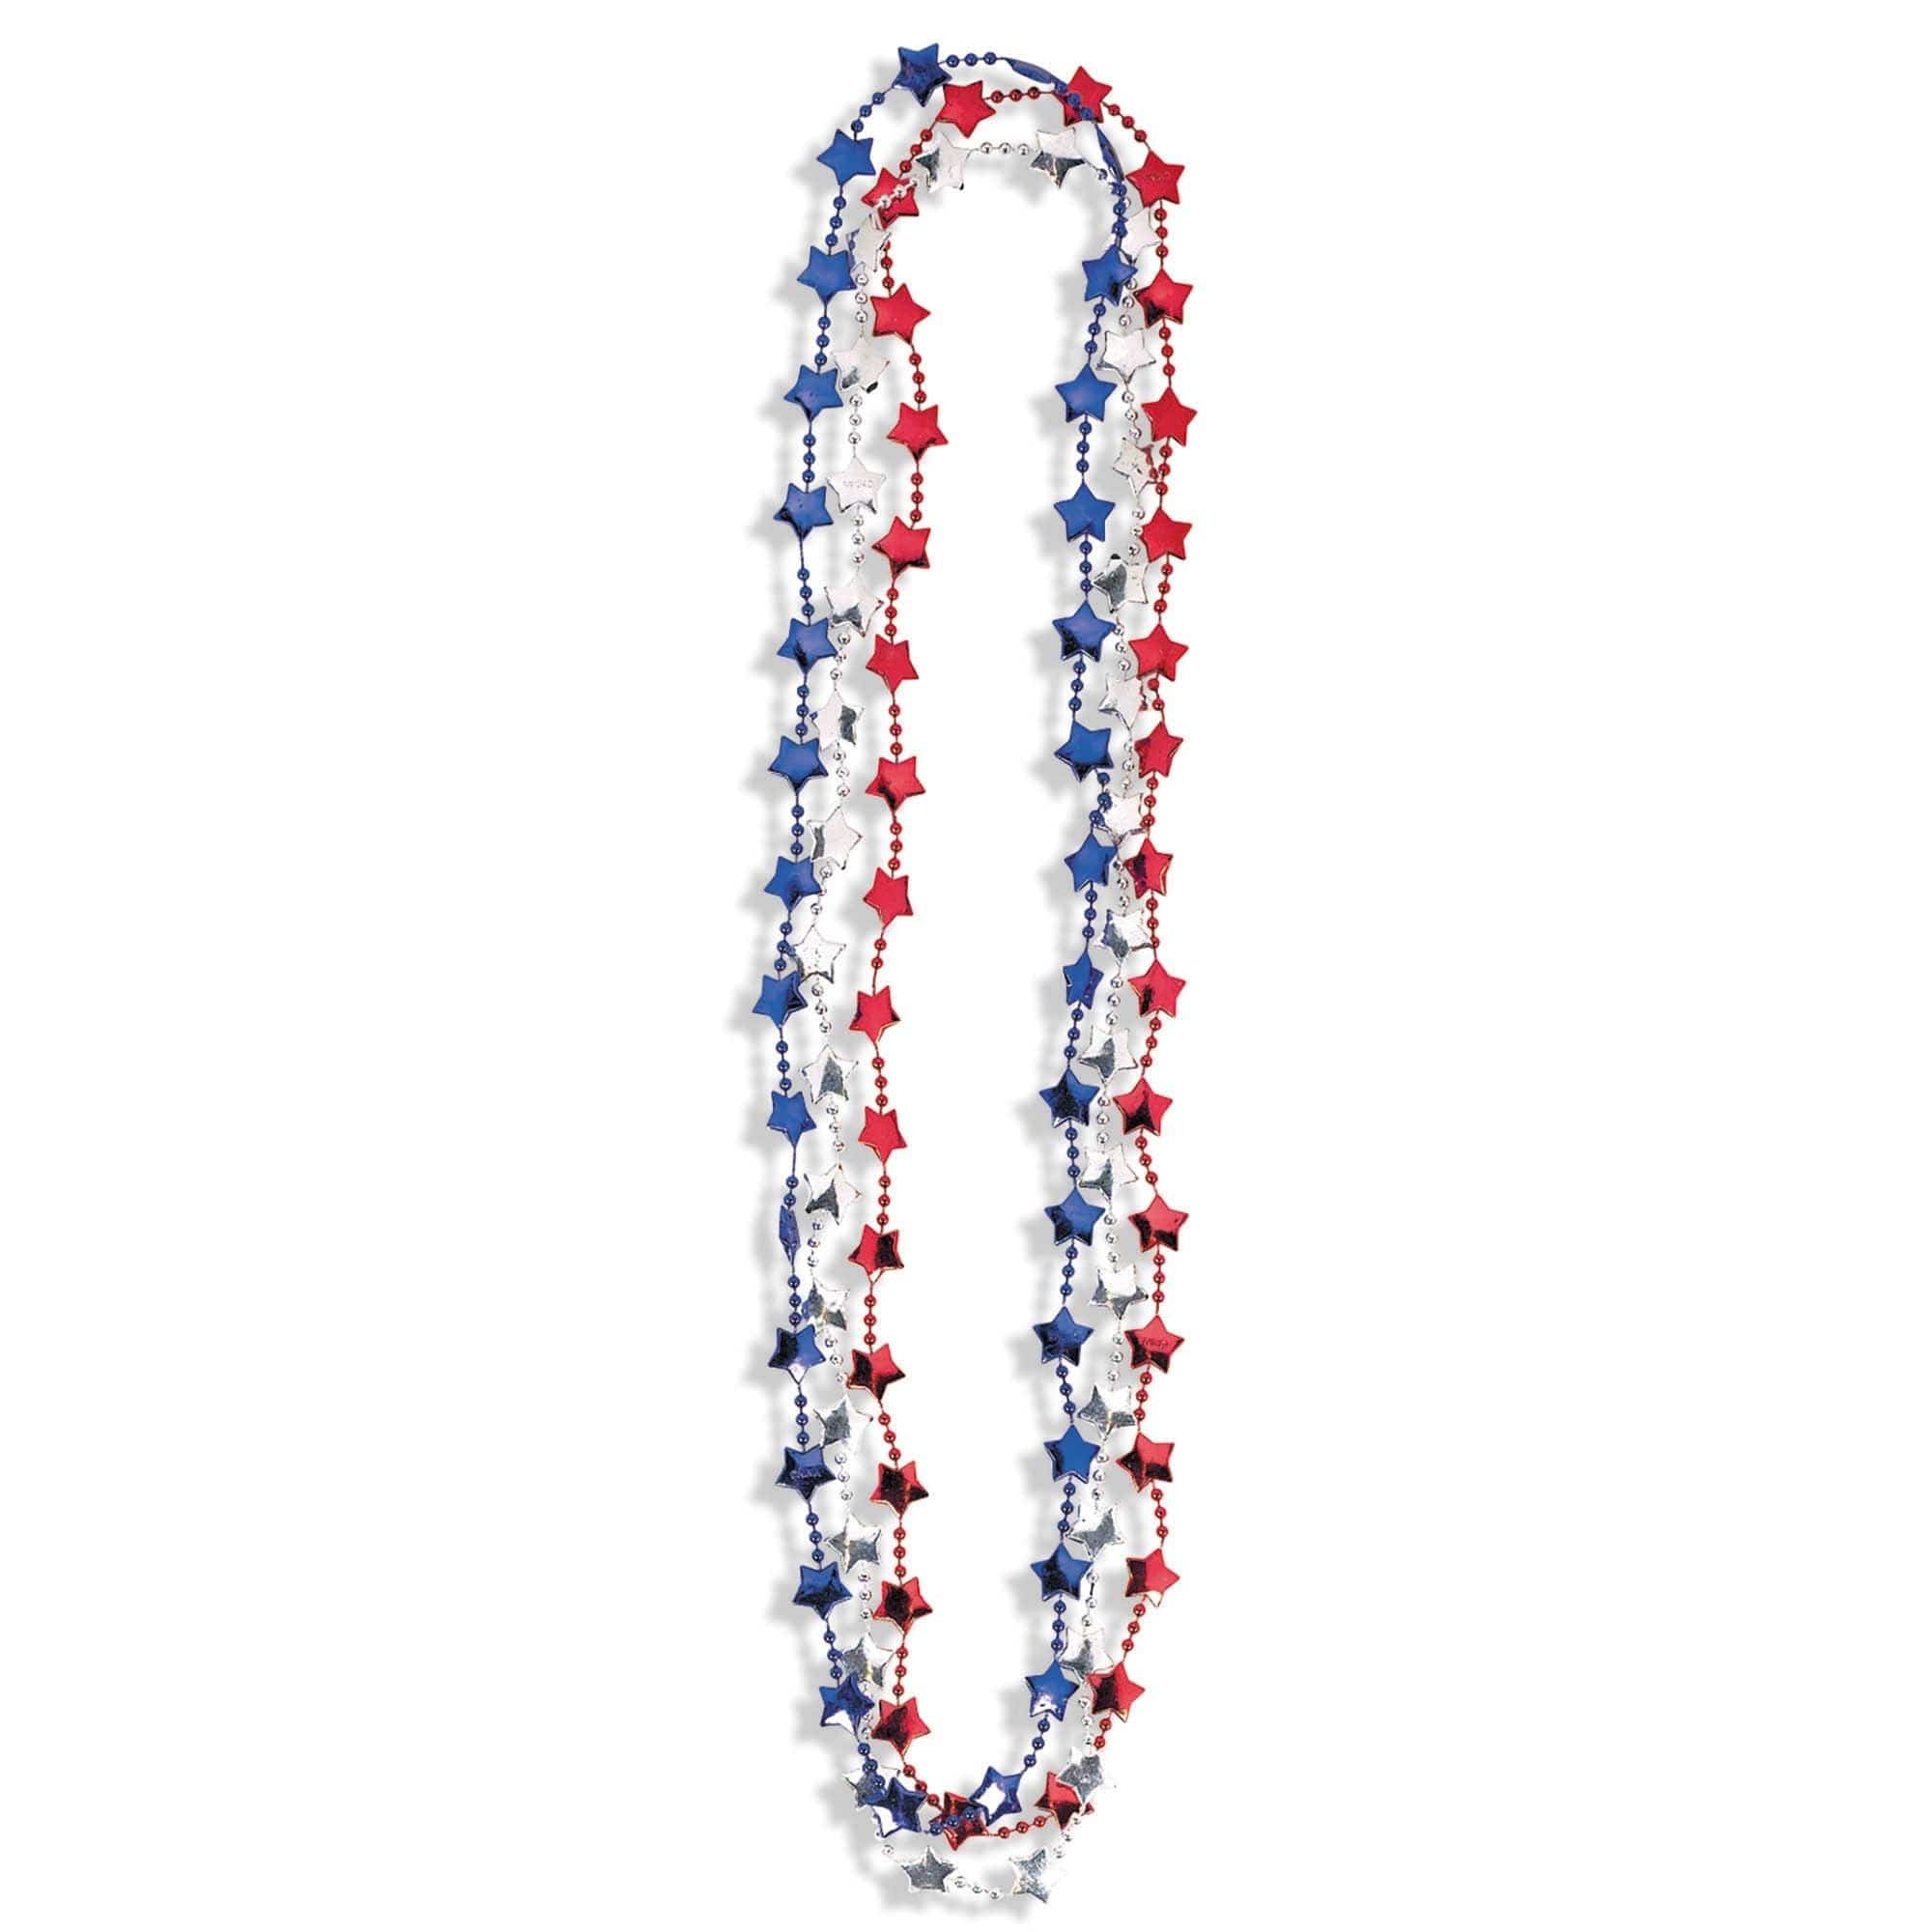 Amscan HOLIDAY: PATRIOTIC Stars Bead Necklaces - Red, White, Blue